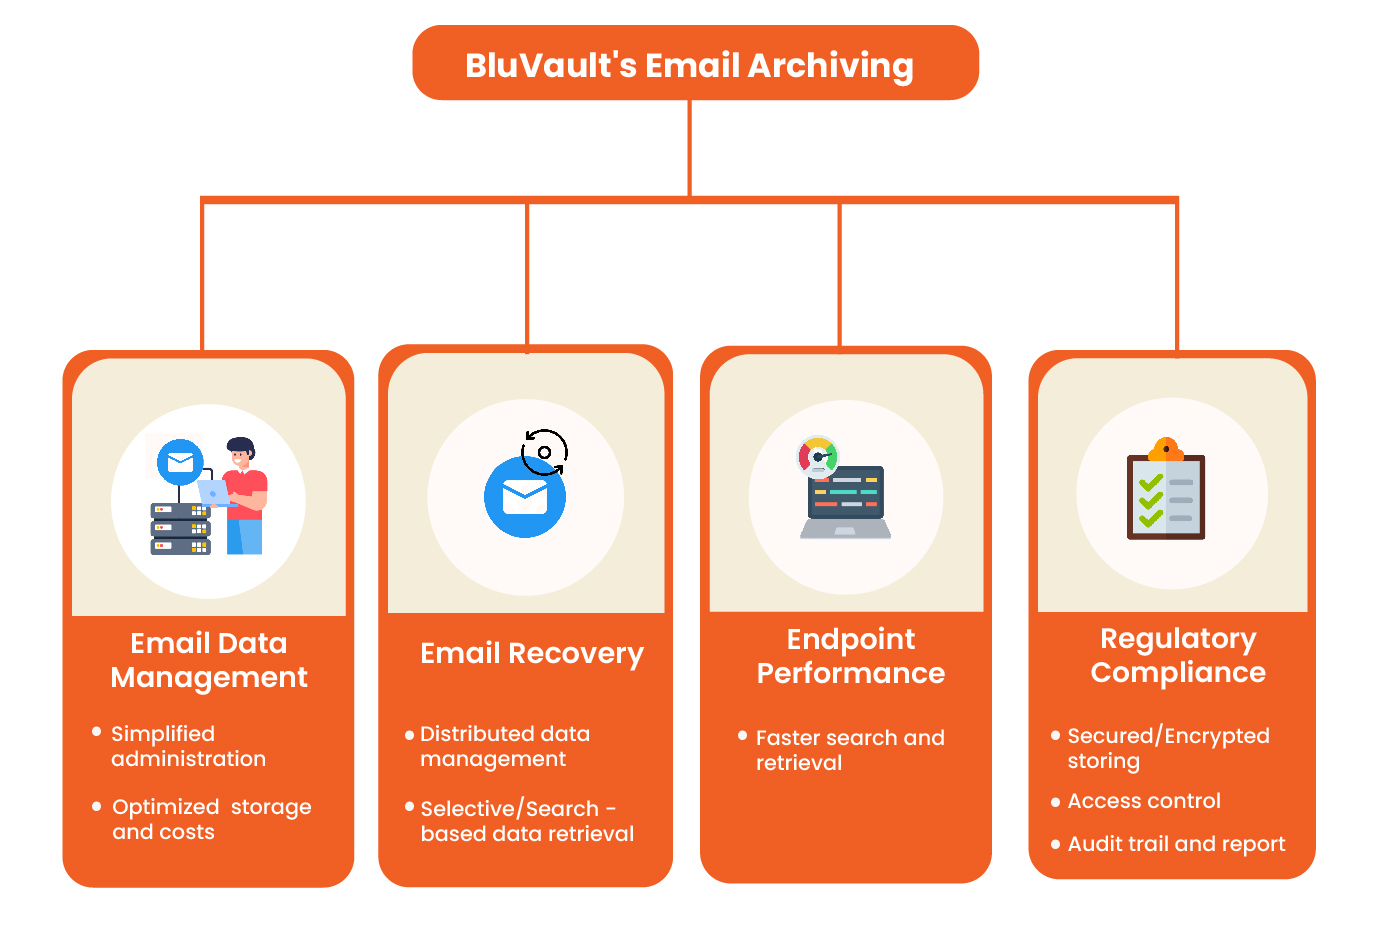 Objectives of Email Archiving